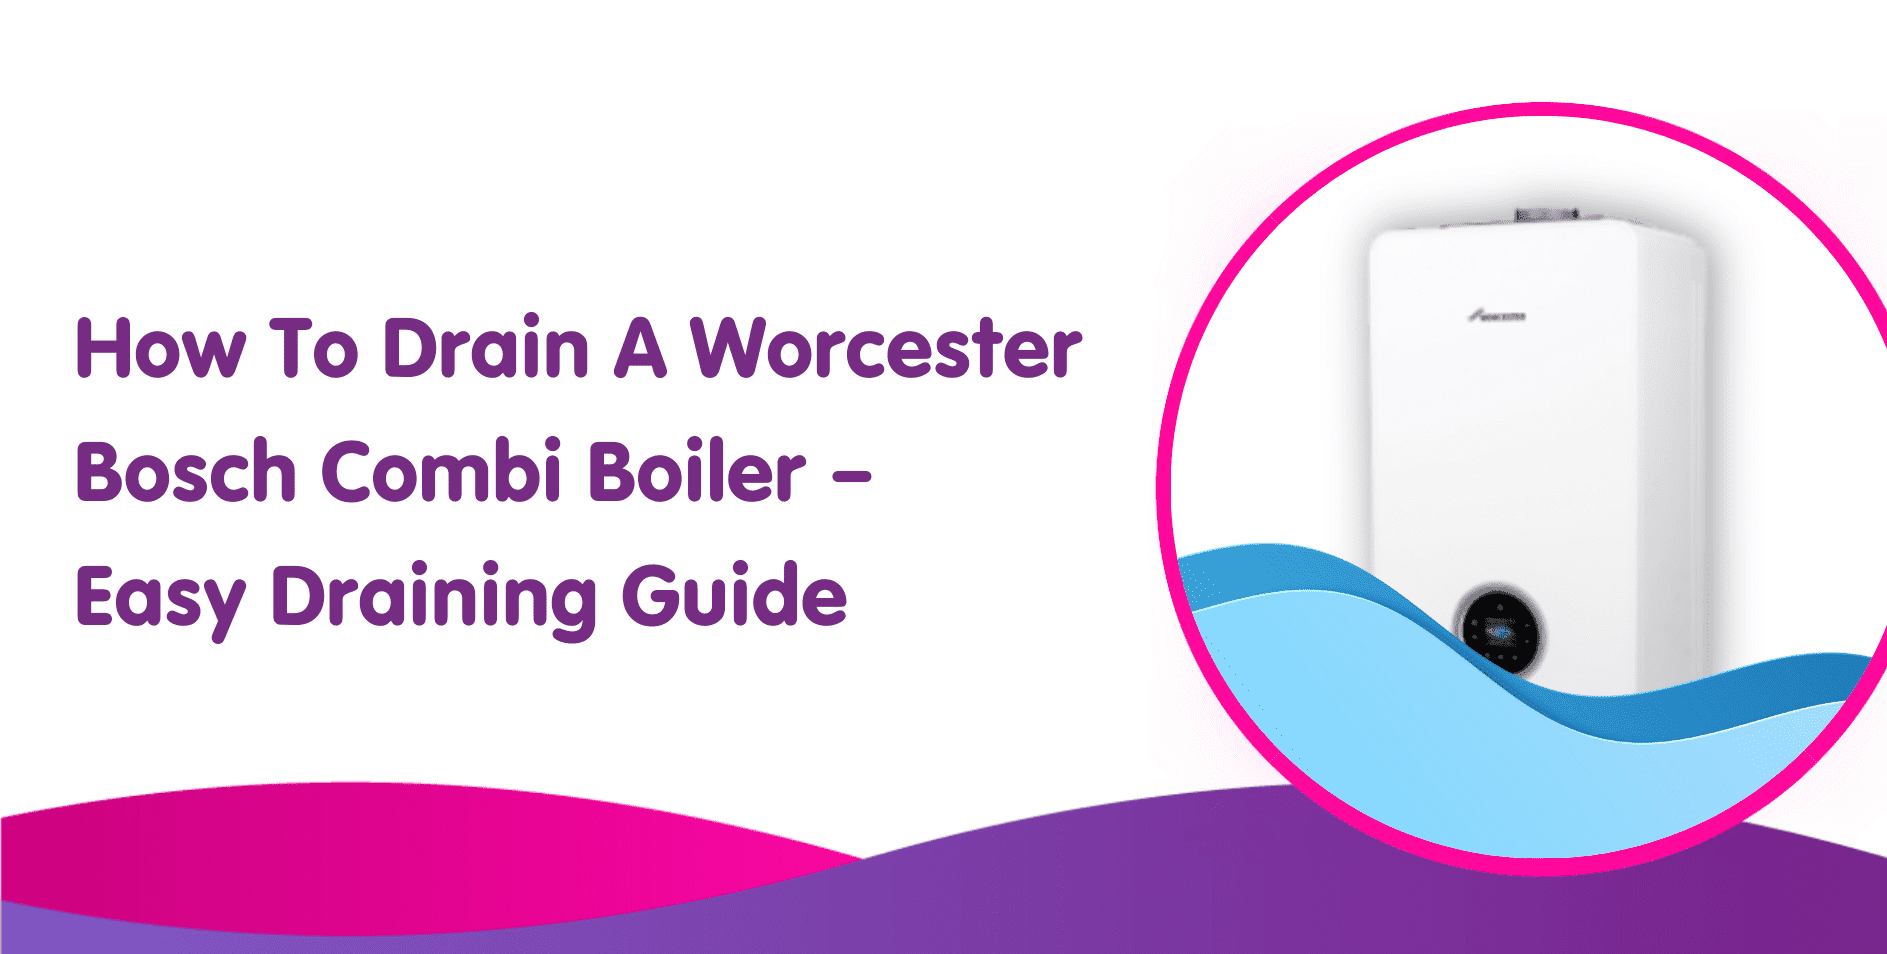 How To Drain A Worcester Bosch Combi Boiler – Easy Draining Guide